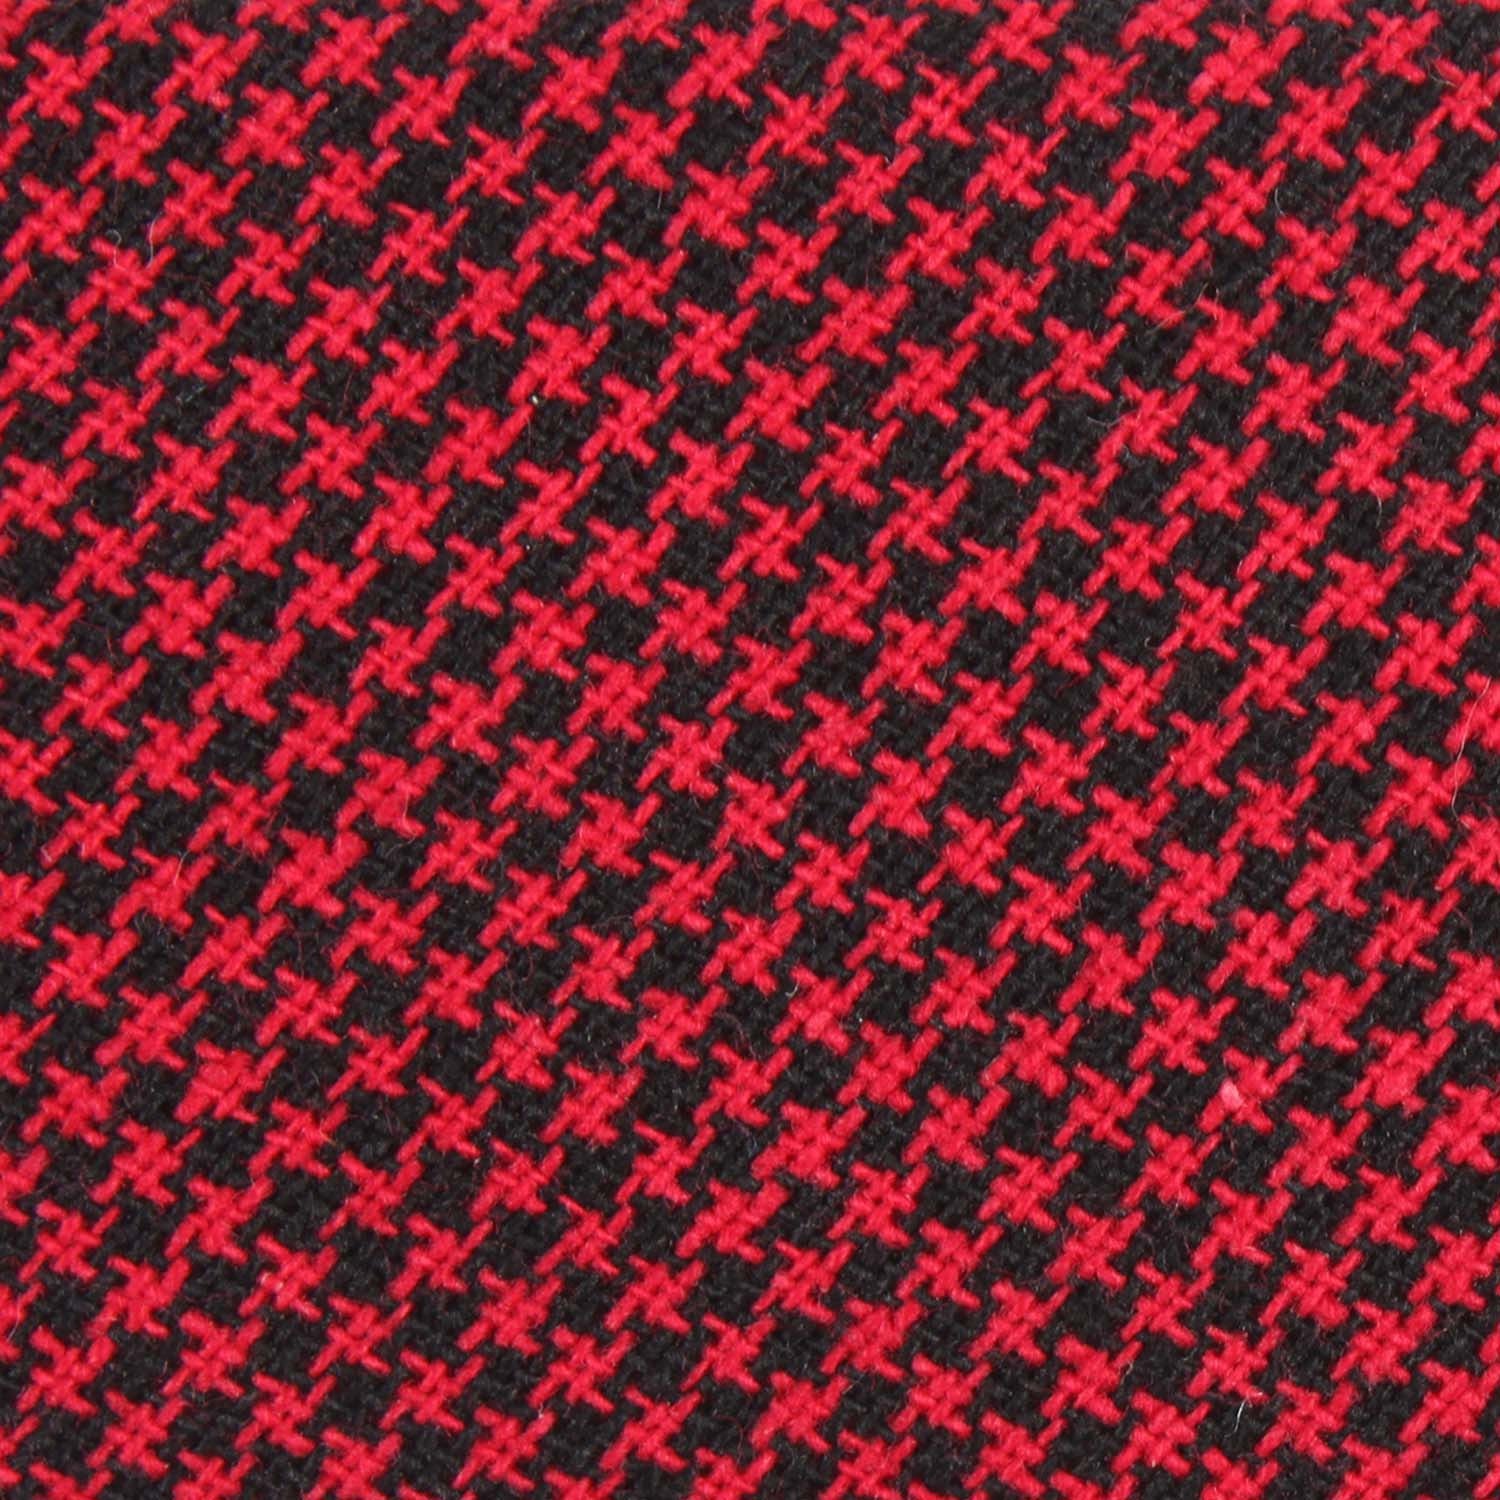 Red & Black Houndstooth Cotton Fabric Kids Bow Tie C165